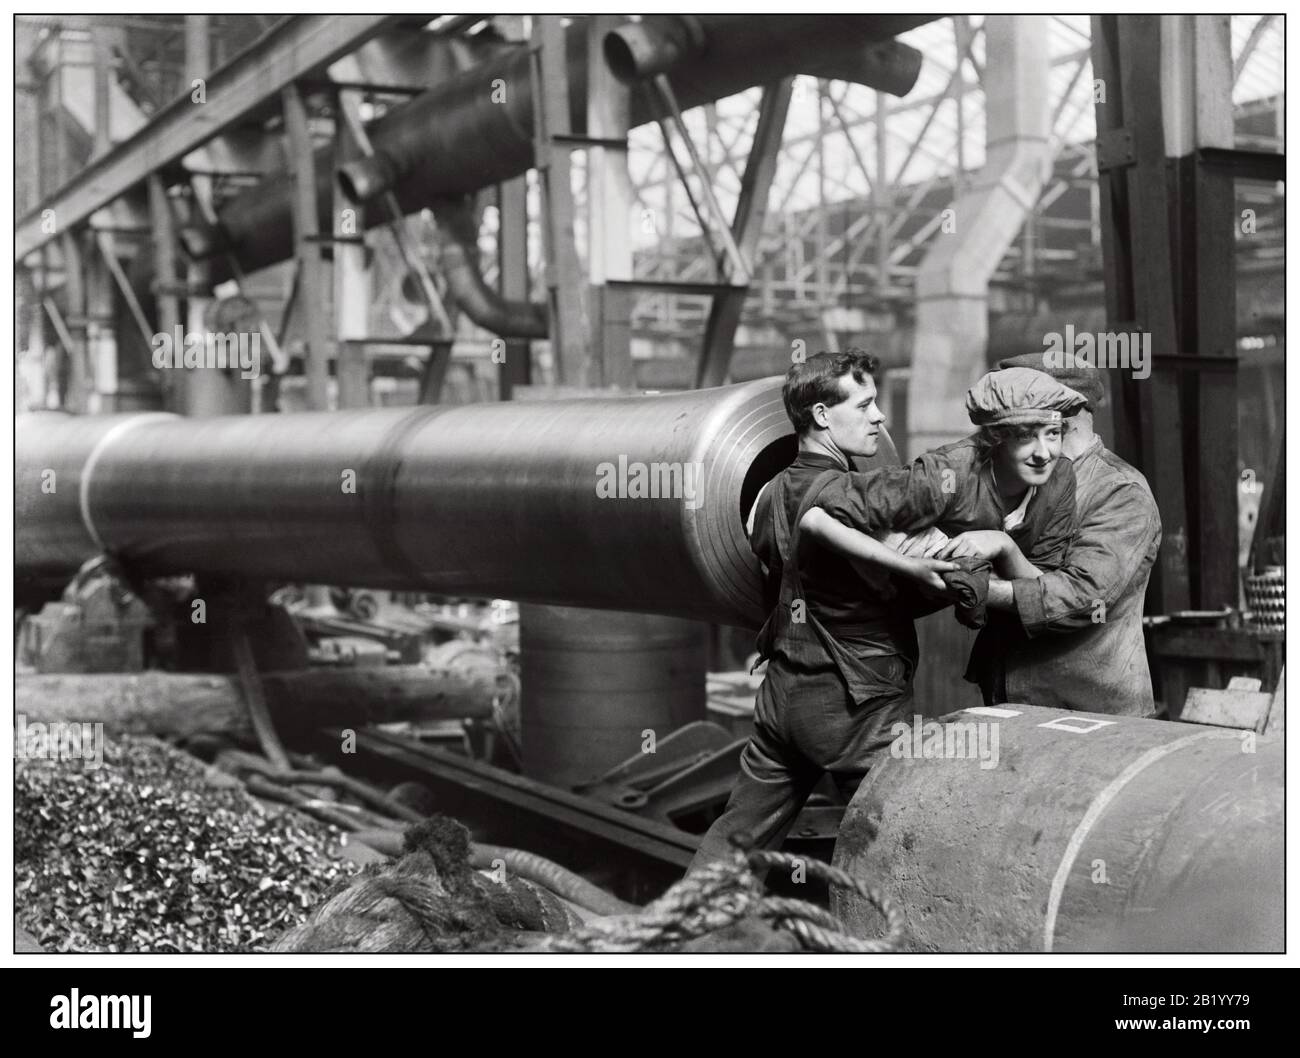 MUNITIONS WW1 1915 A female munitions worker is lifted into the barrel of a 15-inch naval gun manufactured at the Ordnance Works, Coventry, Great Britain during the First World War, in order to clean the rifling. World War 1 The Great War Naval Gun Barrel cleaning Stock Photo